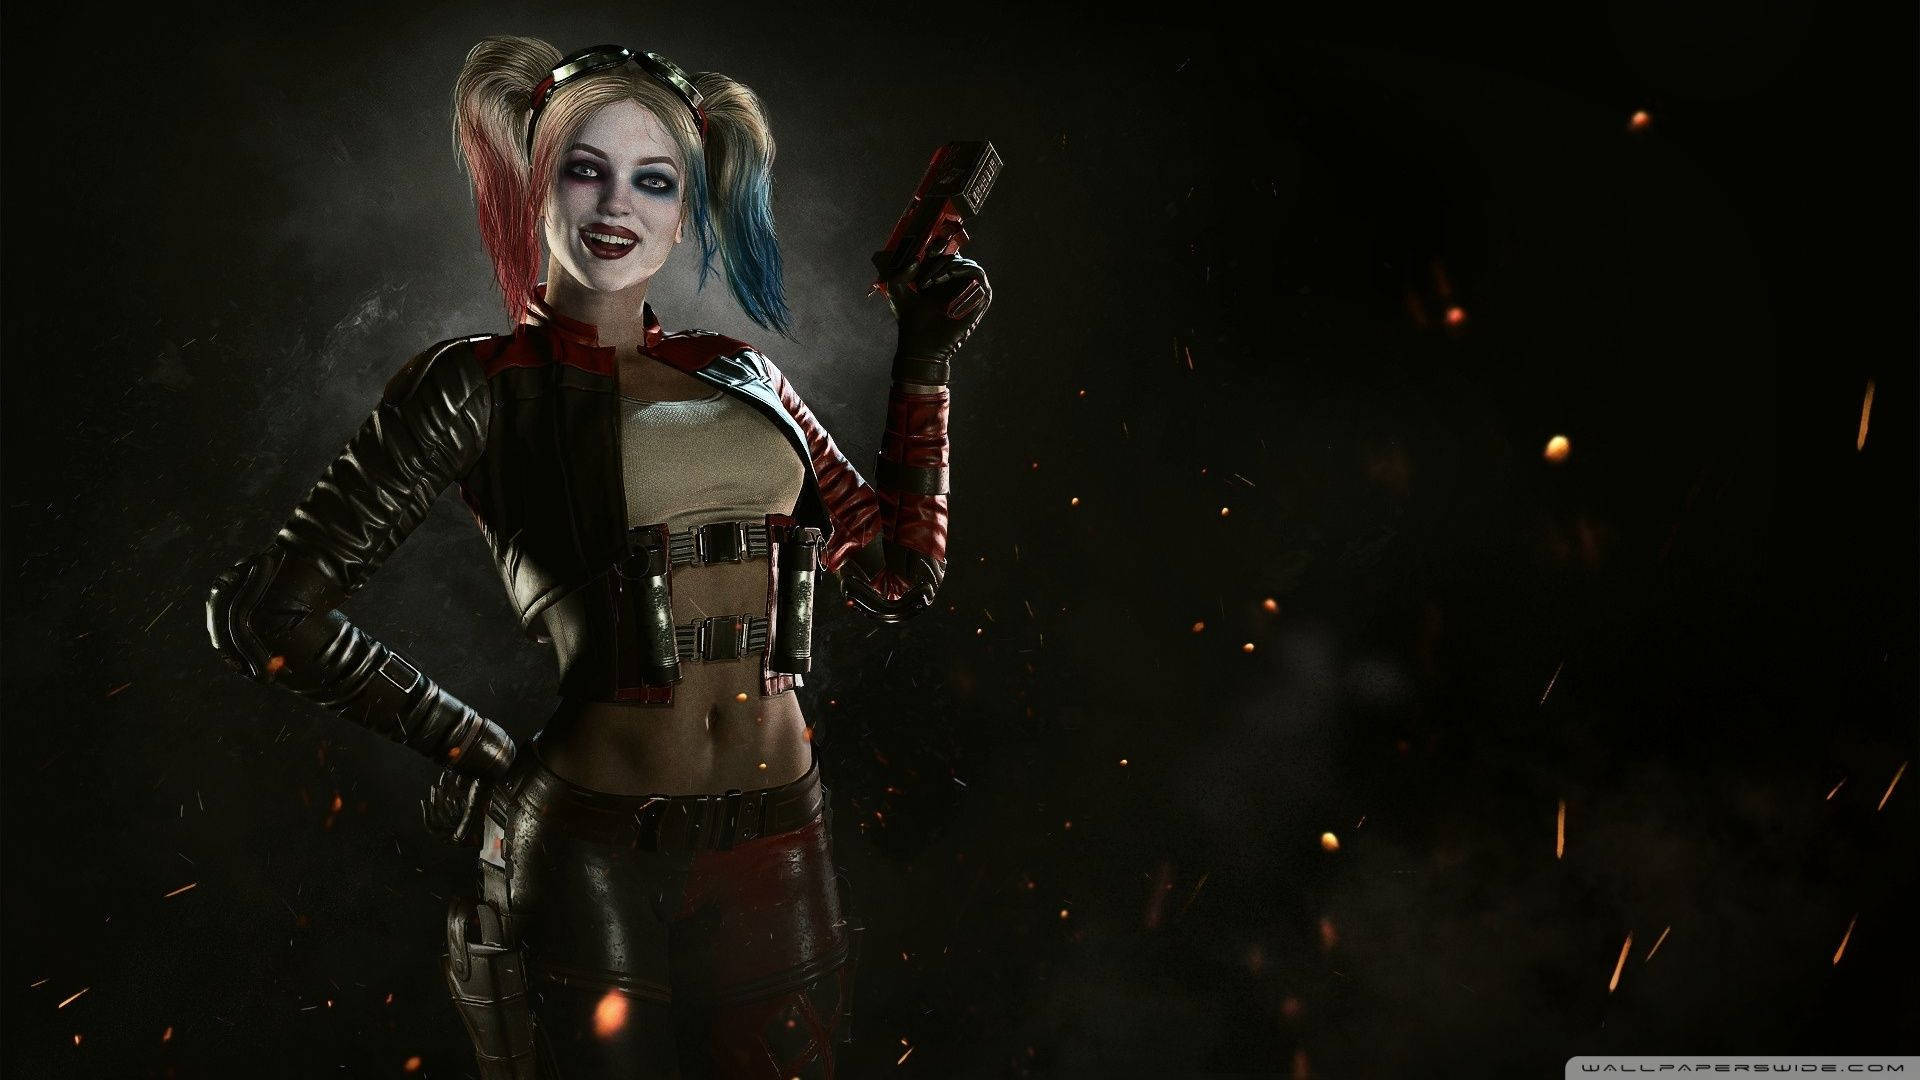 Shiny Leather Outfit Harley Quinn 4k Background